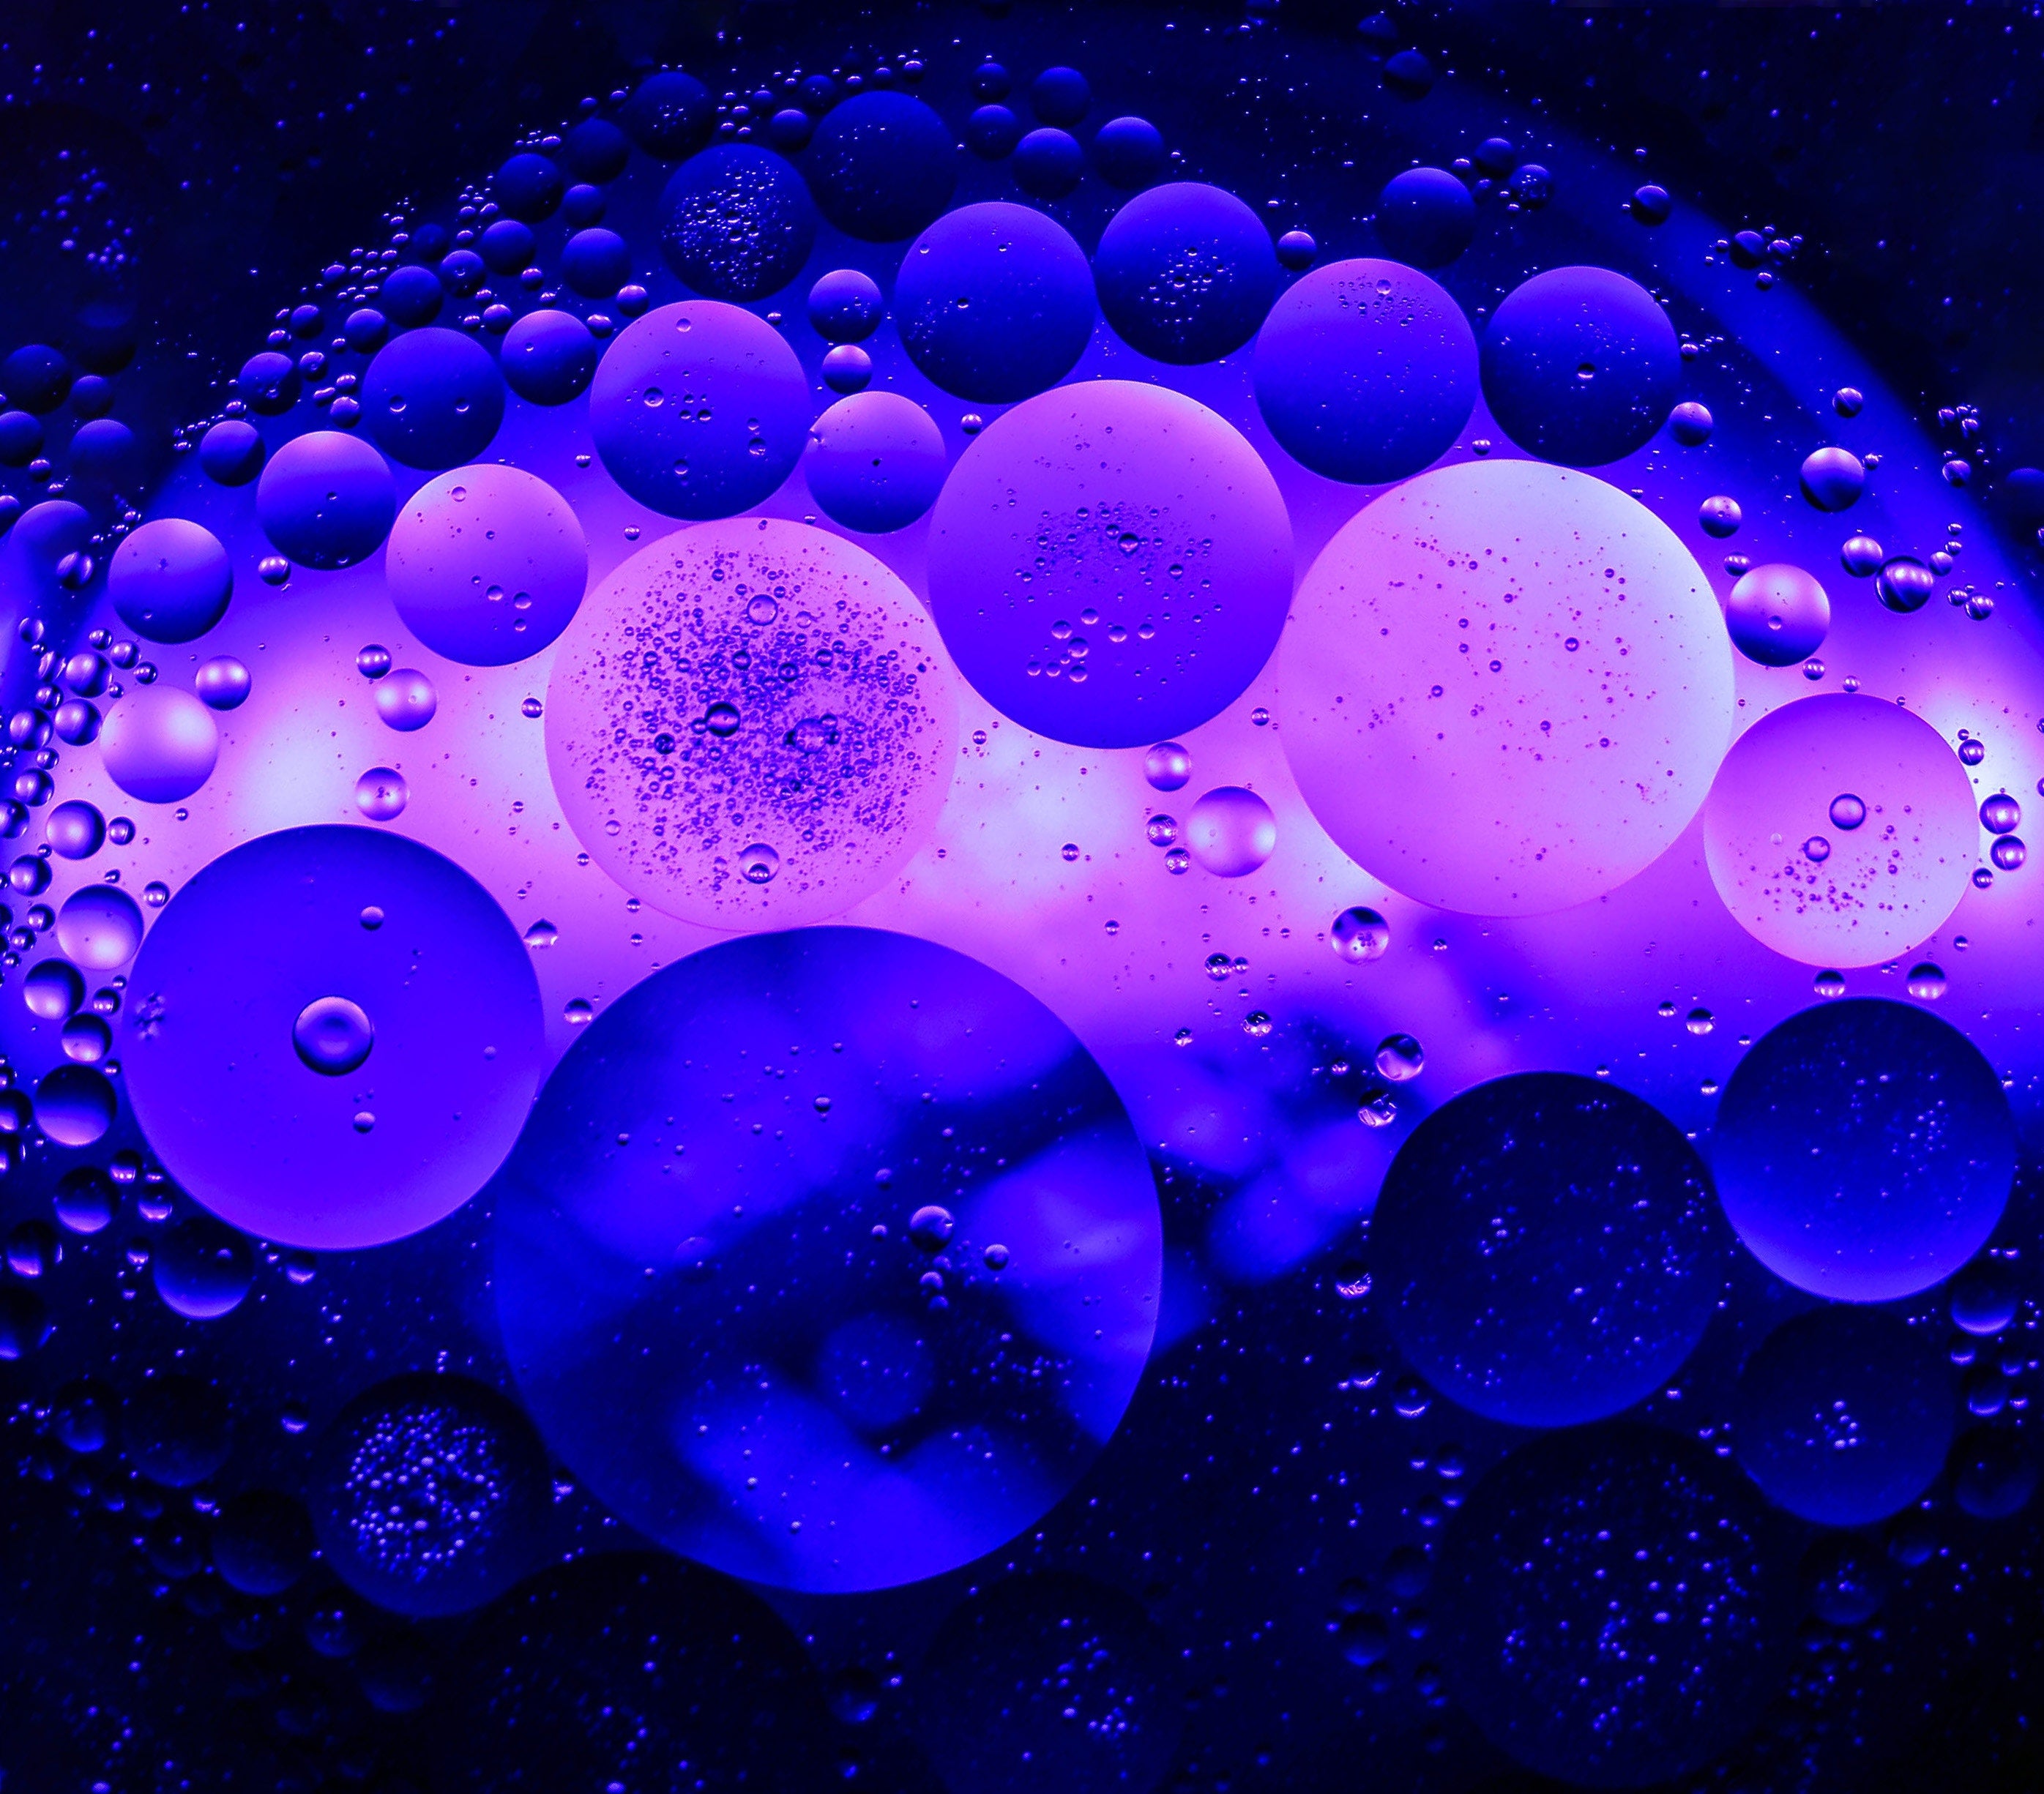 Bubble 4K wallpaper for your desktop or mobile screen free and easy to download